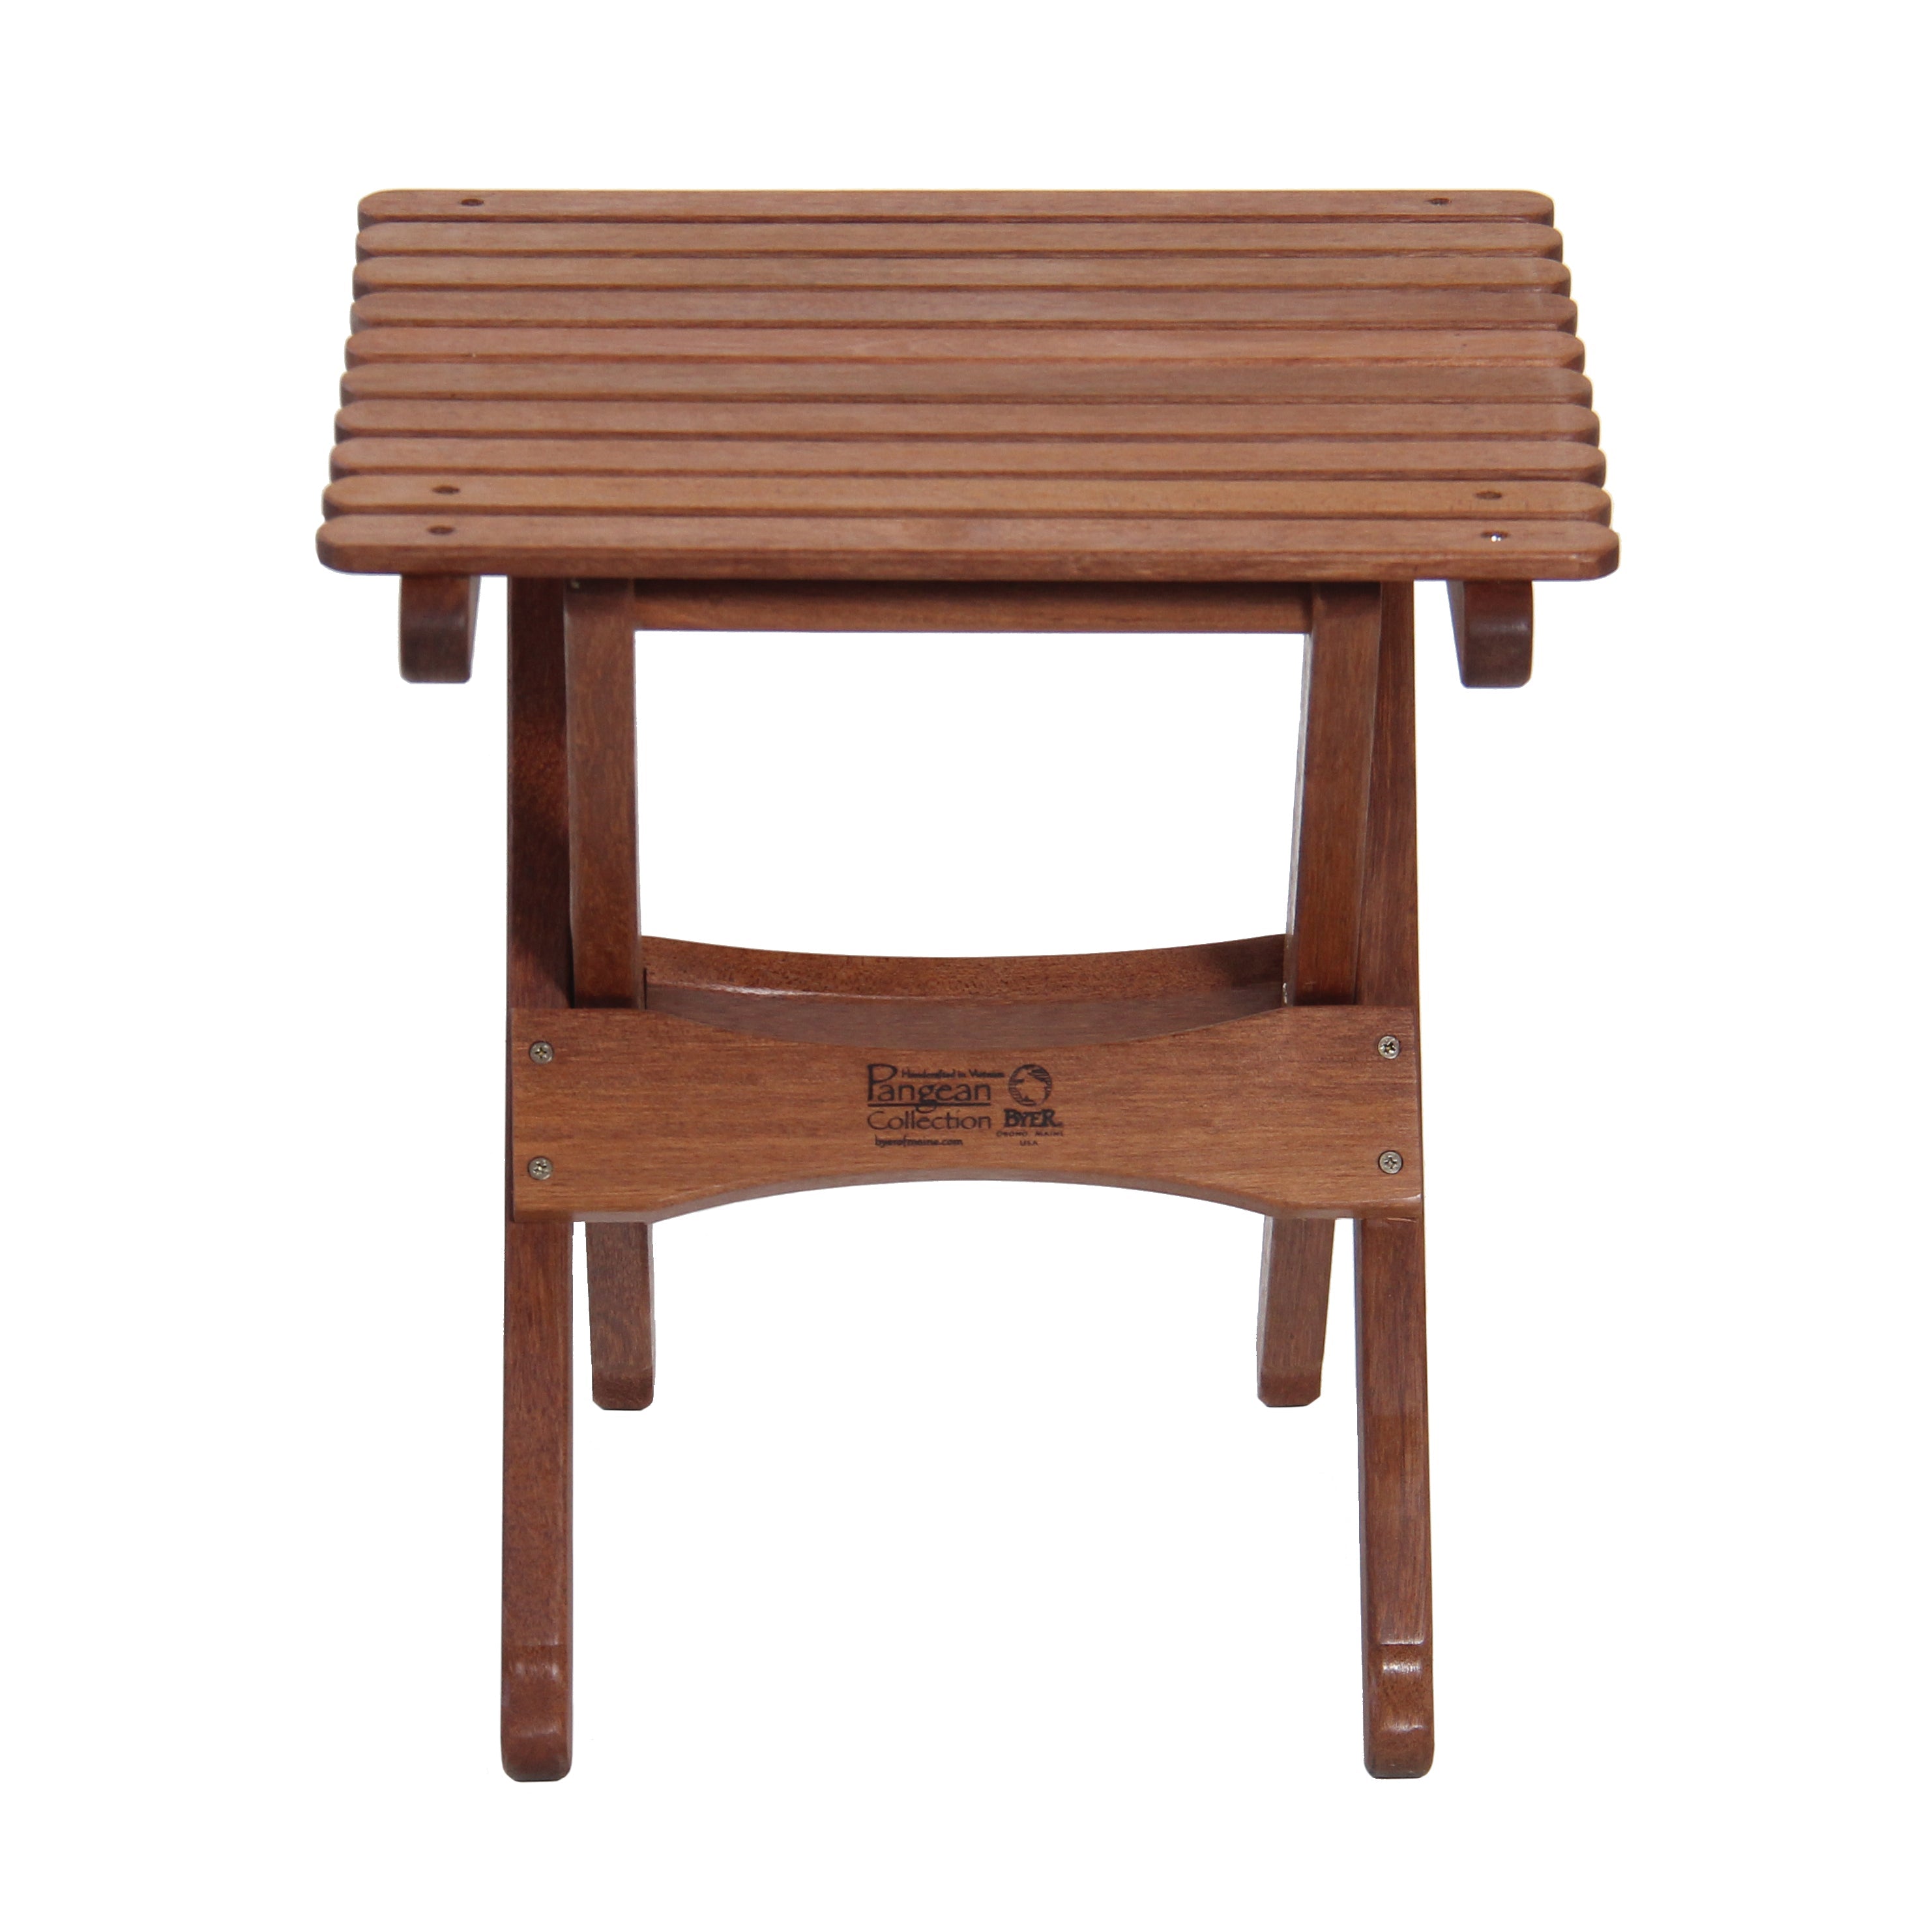 Byer Of Maine Pangean Folding Table - Small